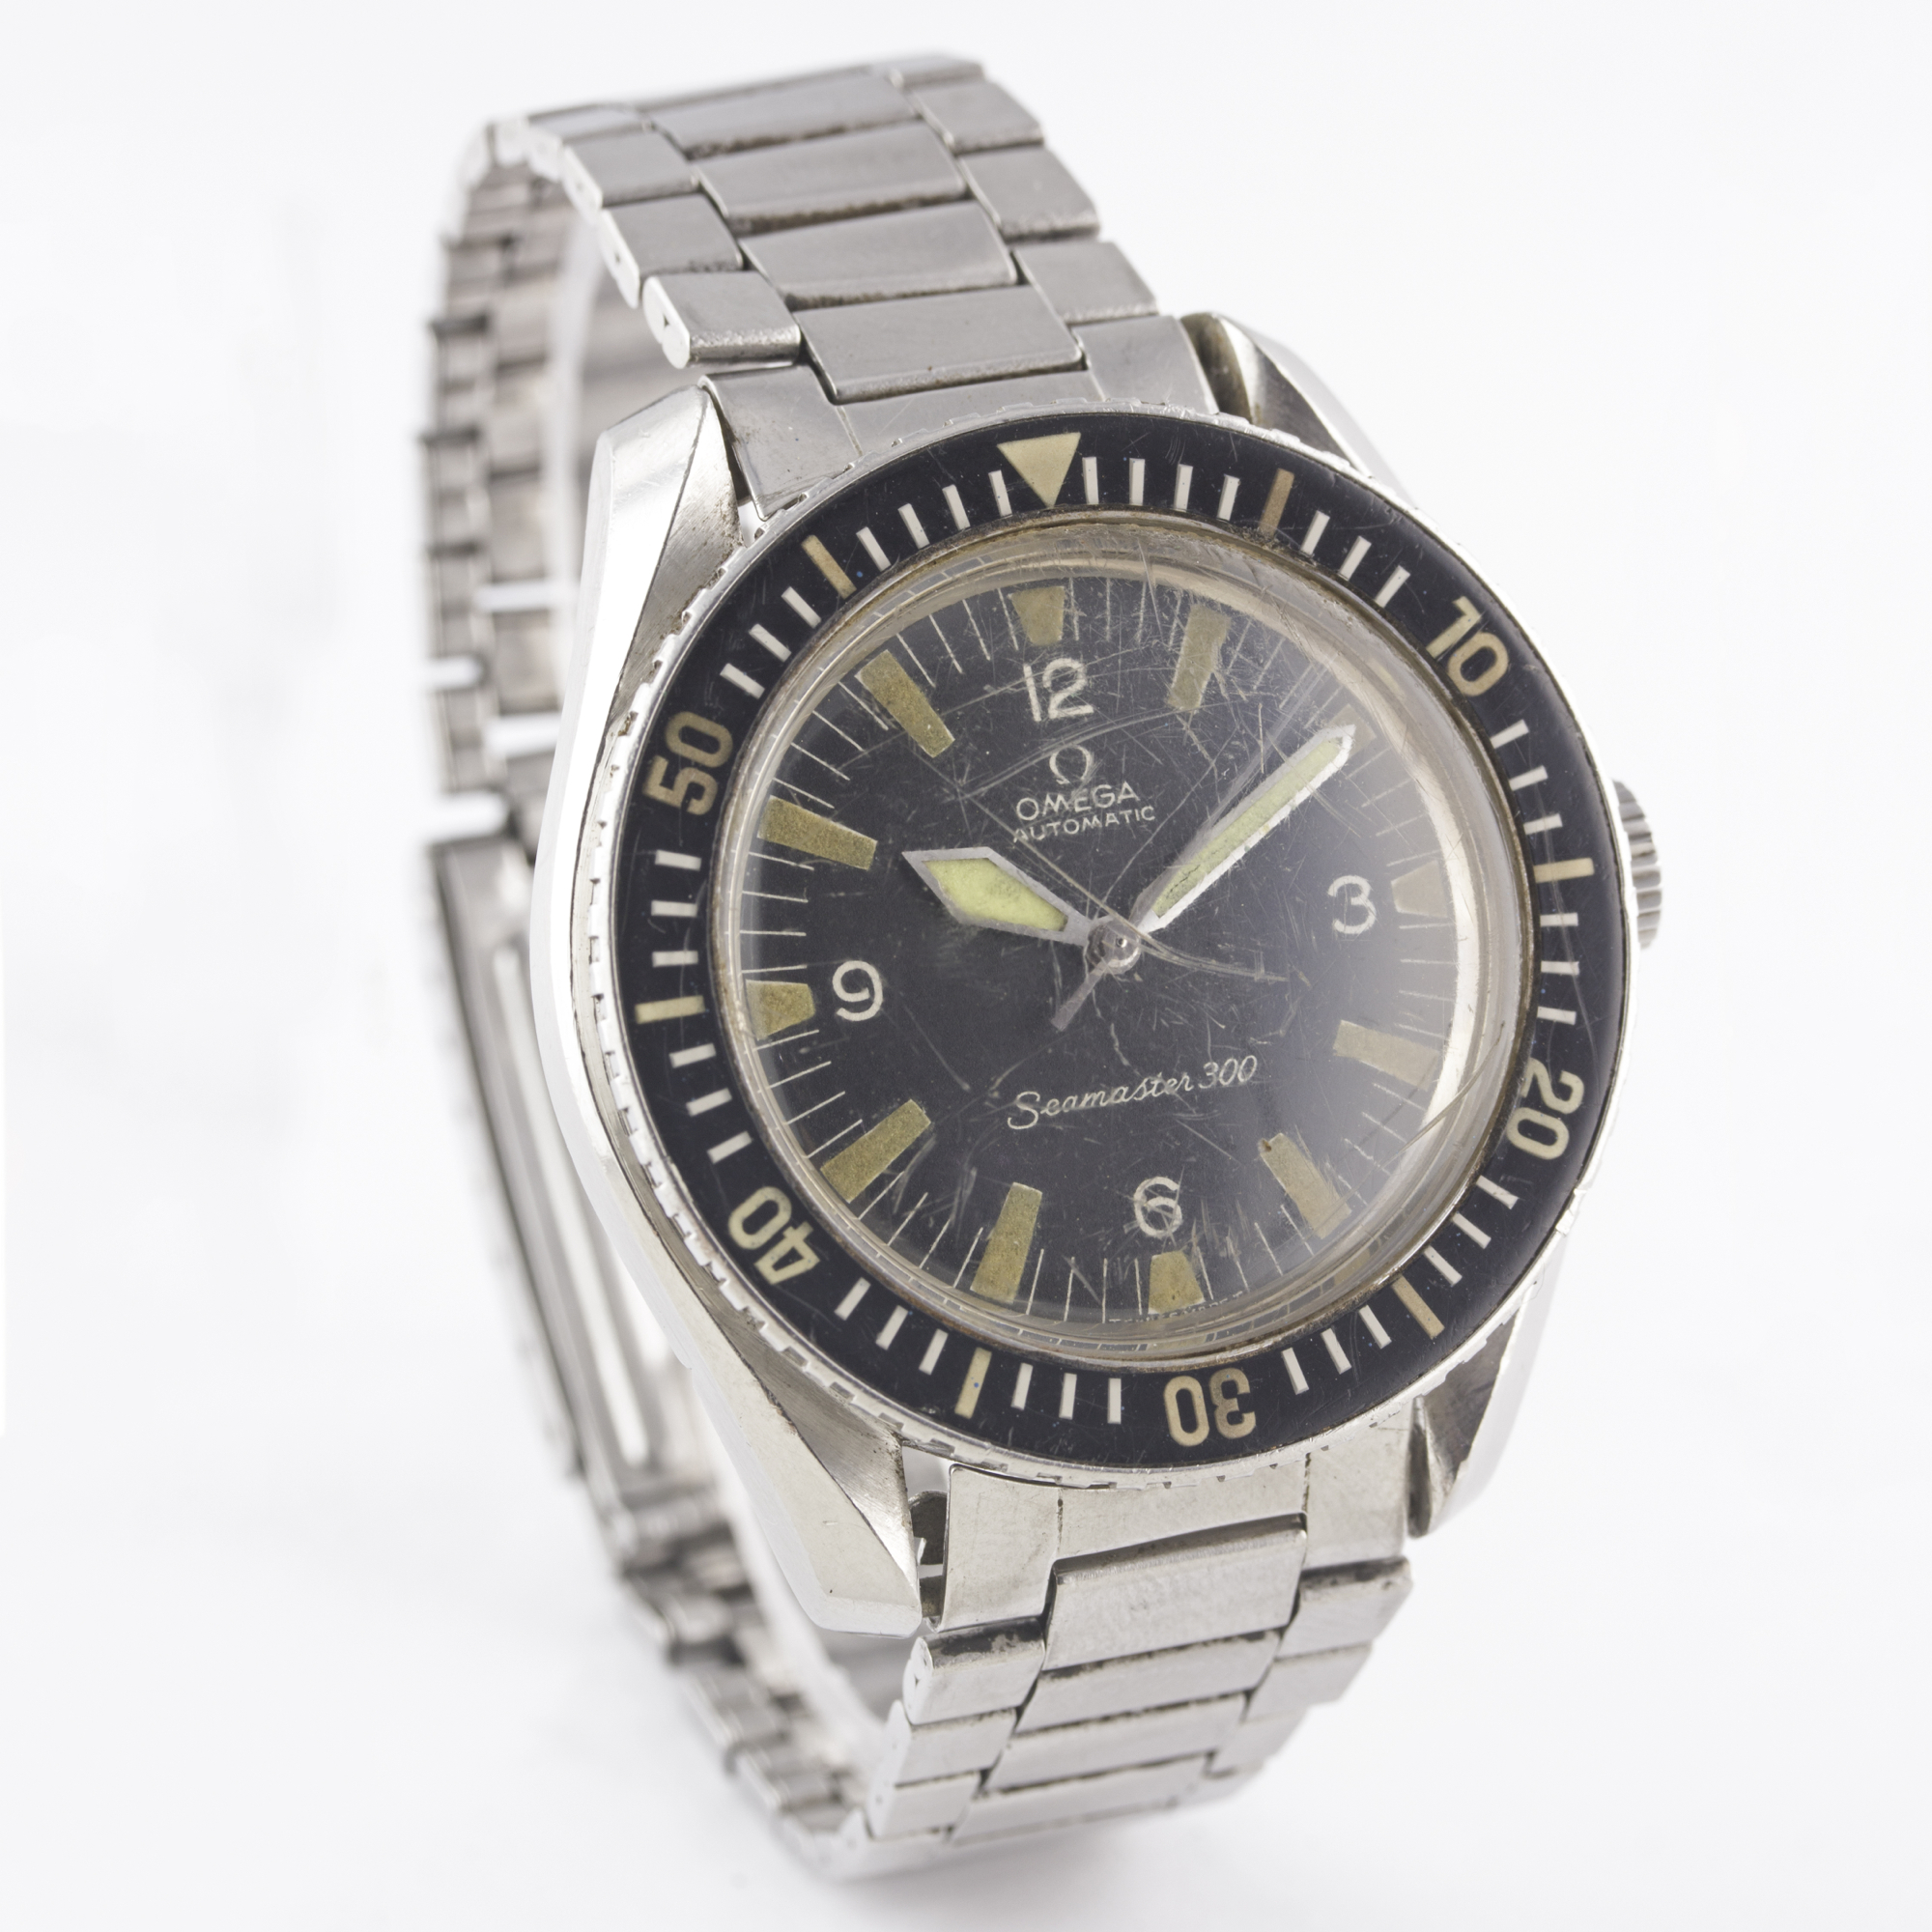 A RARE GENTLEMAN'S STAINLESS STEEL OMEGA SEAMASTER 300 BRACELET WATCH CIRCA 1967, REF. 165024 - Image 6 of 8